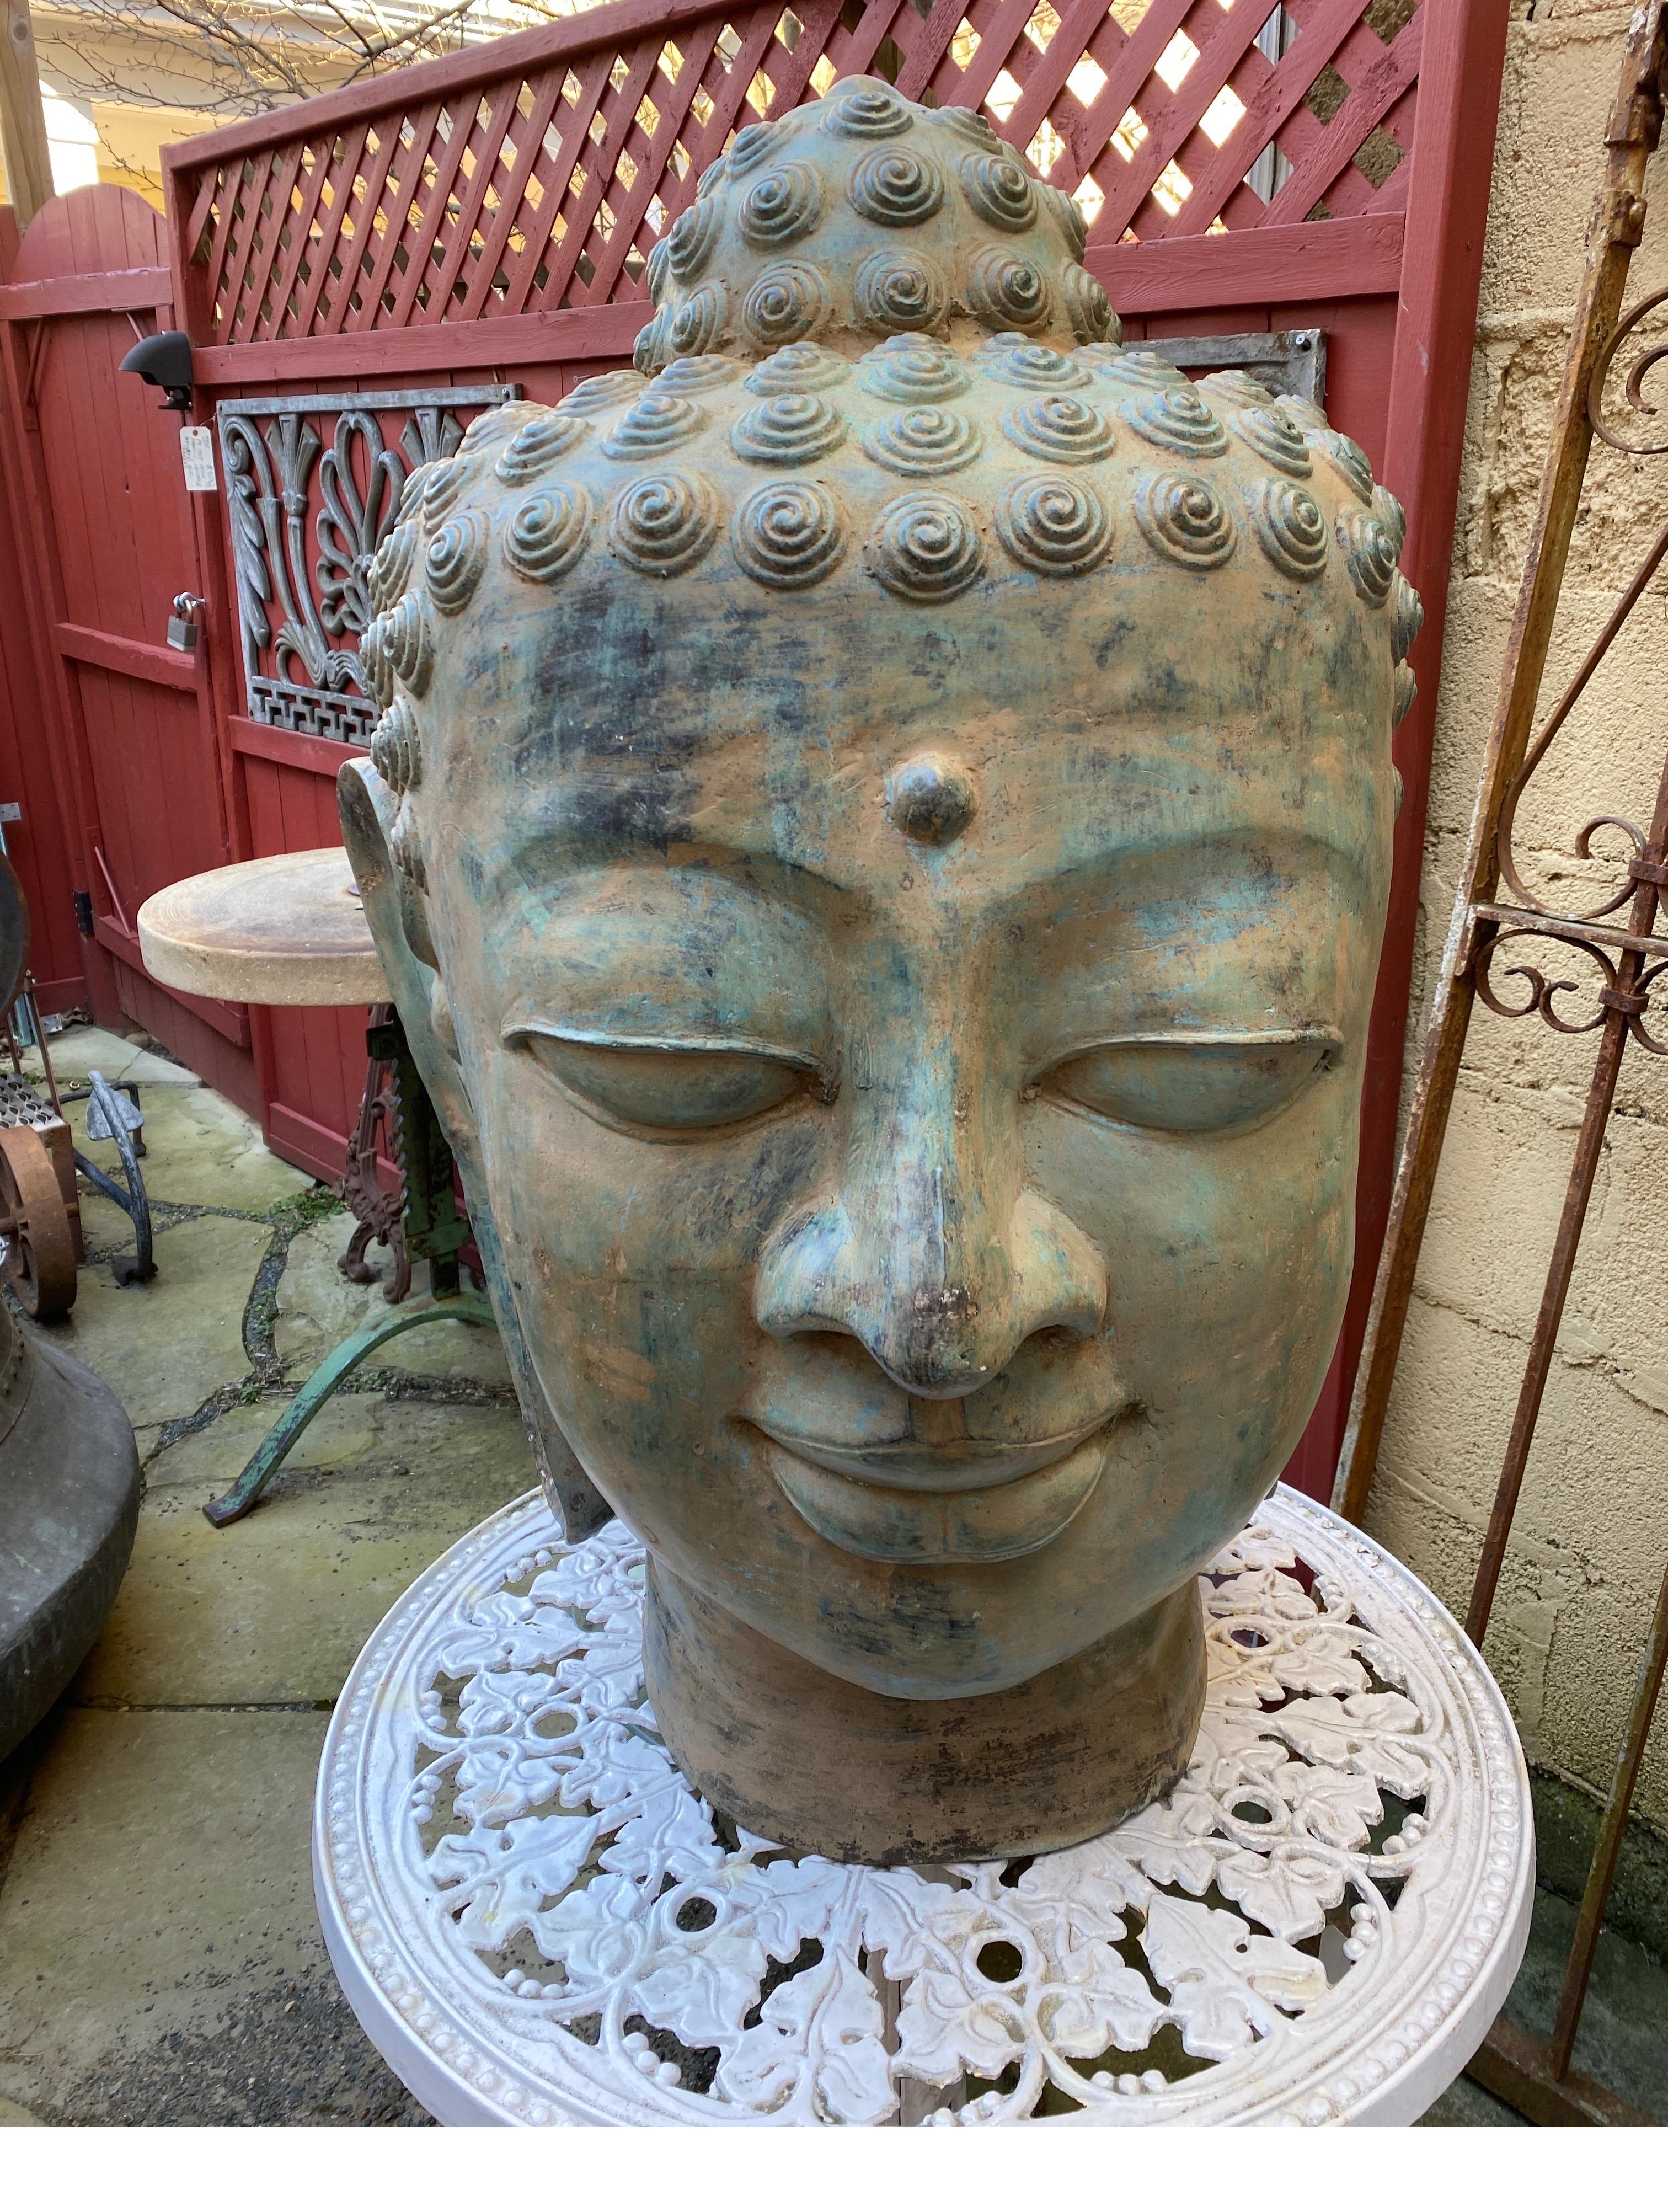 Fabulous large bronze Buddha head with original aged verdigris surface. Impressive statement piece, 35 inches tall, mid 20th Century China.